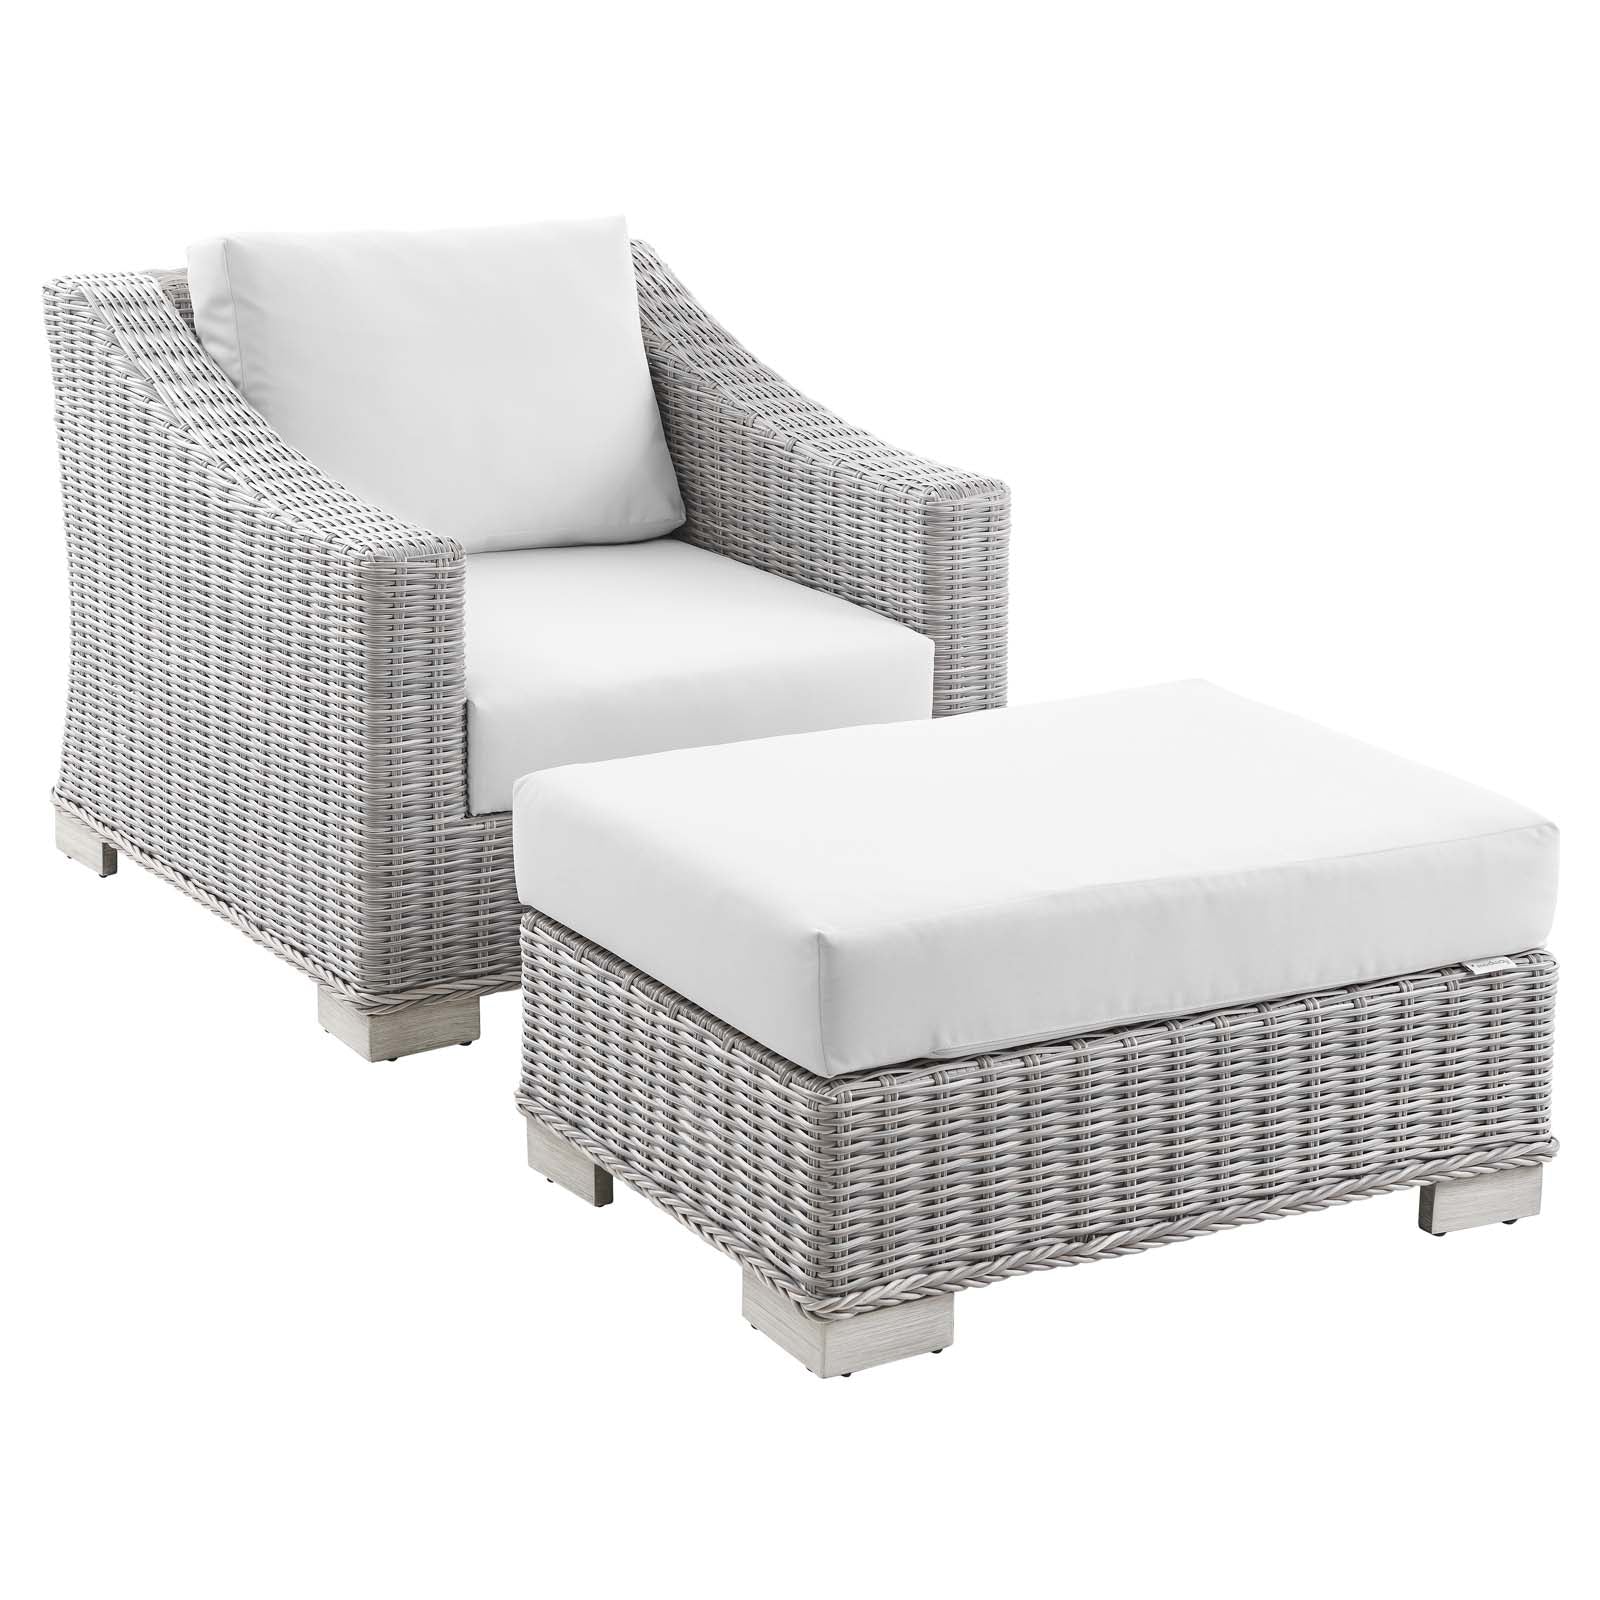 Modway - Conway Outdoor Patio Wicker Rattan 2-Piece Armchair and Ottoman Set - EEI-5090